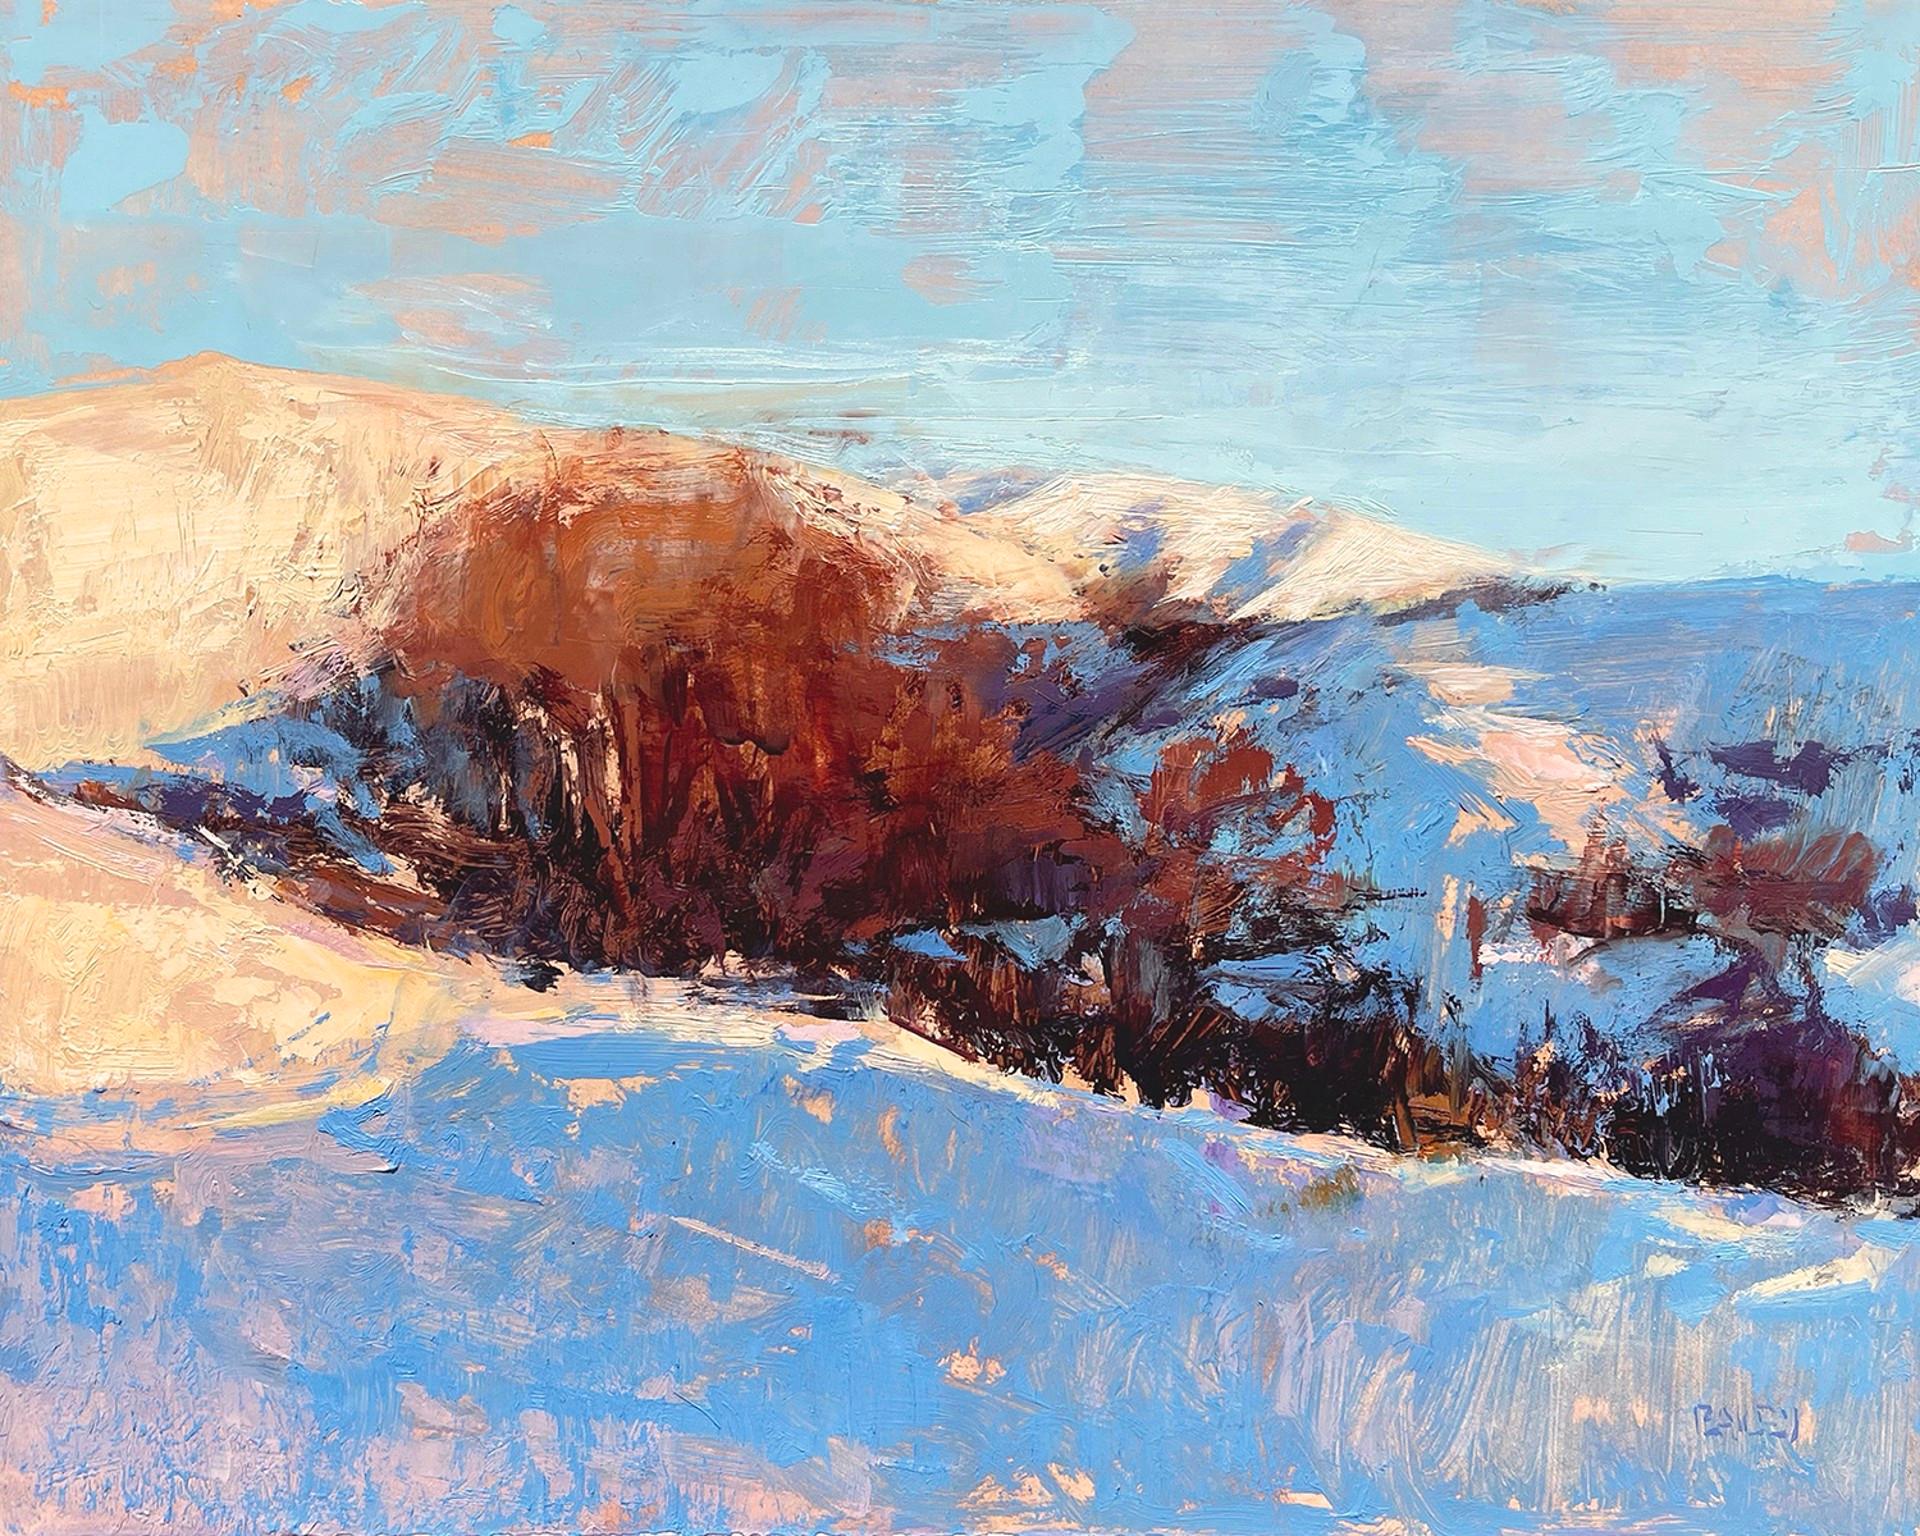 Mark Andrew Bailey Landscape Painting - "Nestled In" Oil Painting